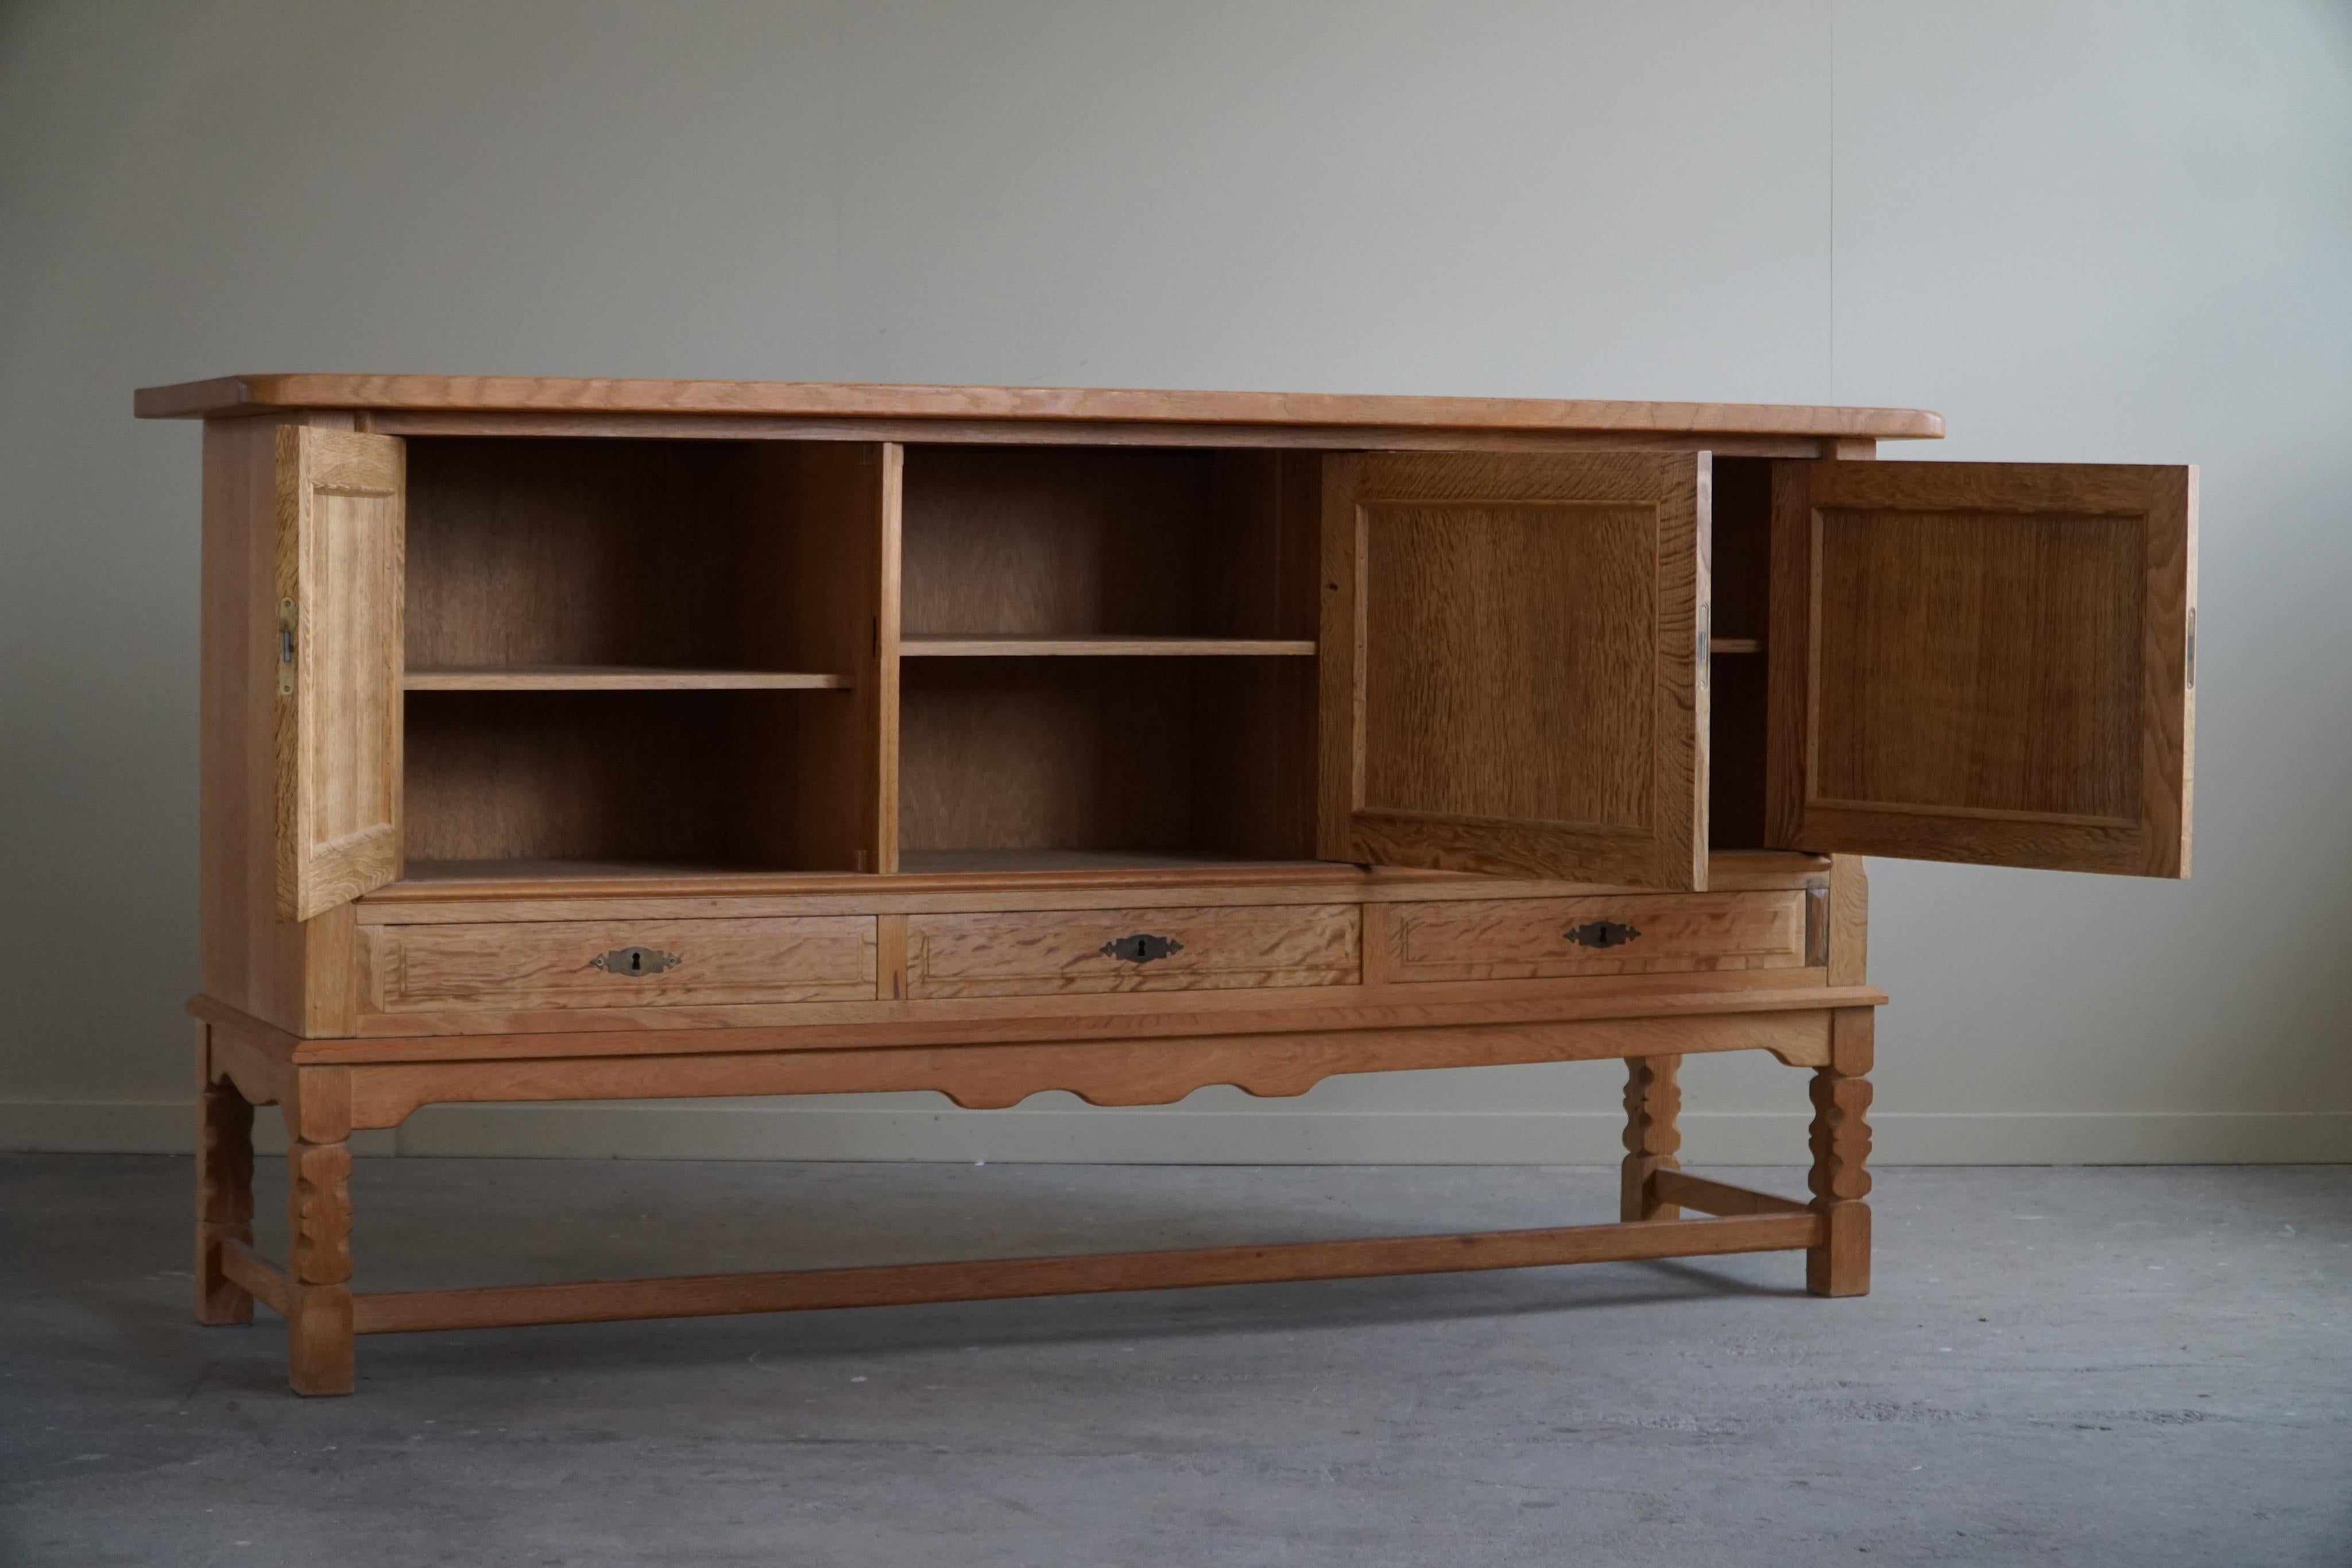 20th Century Sideboard in Oak, Midcentury, Made by a Danish Cabinetmaker, Brutalist, 1960s